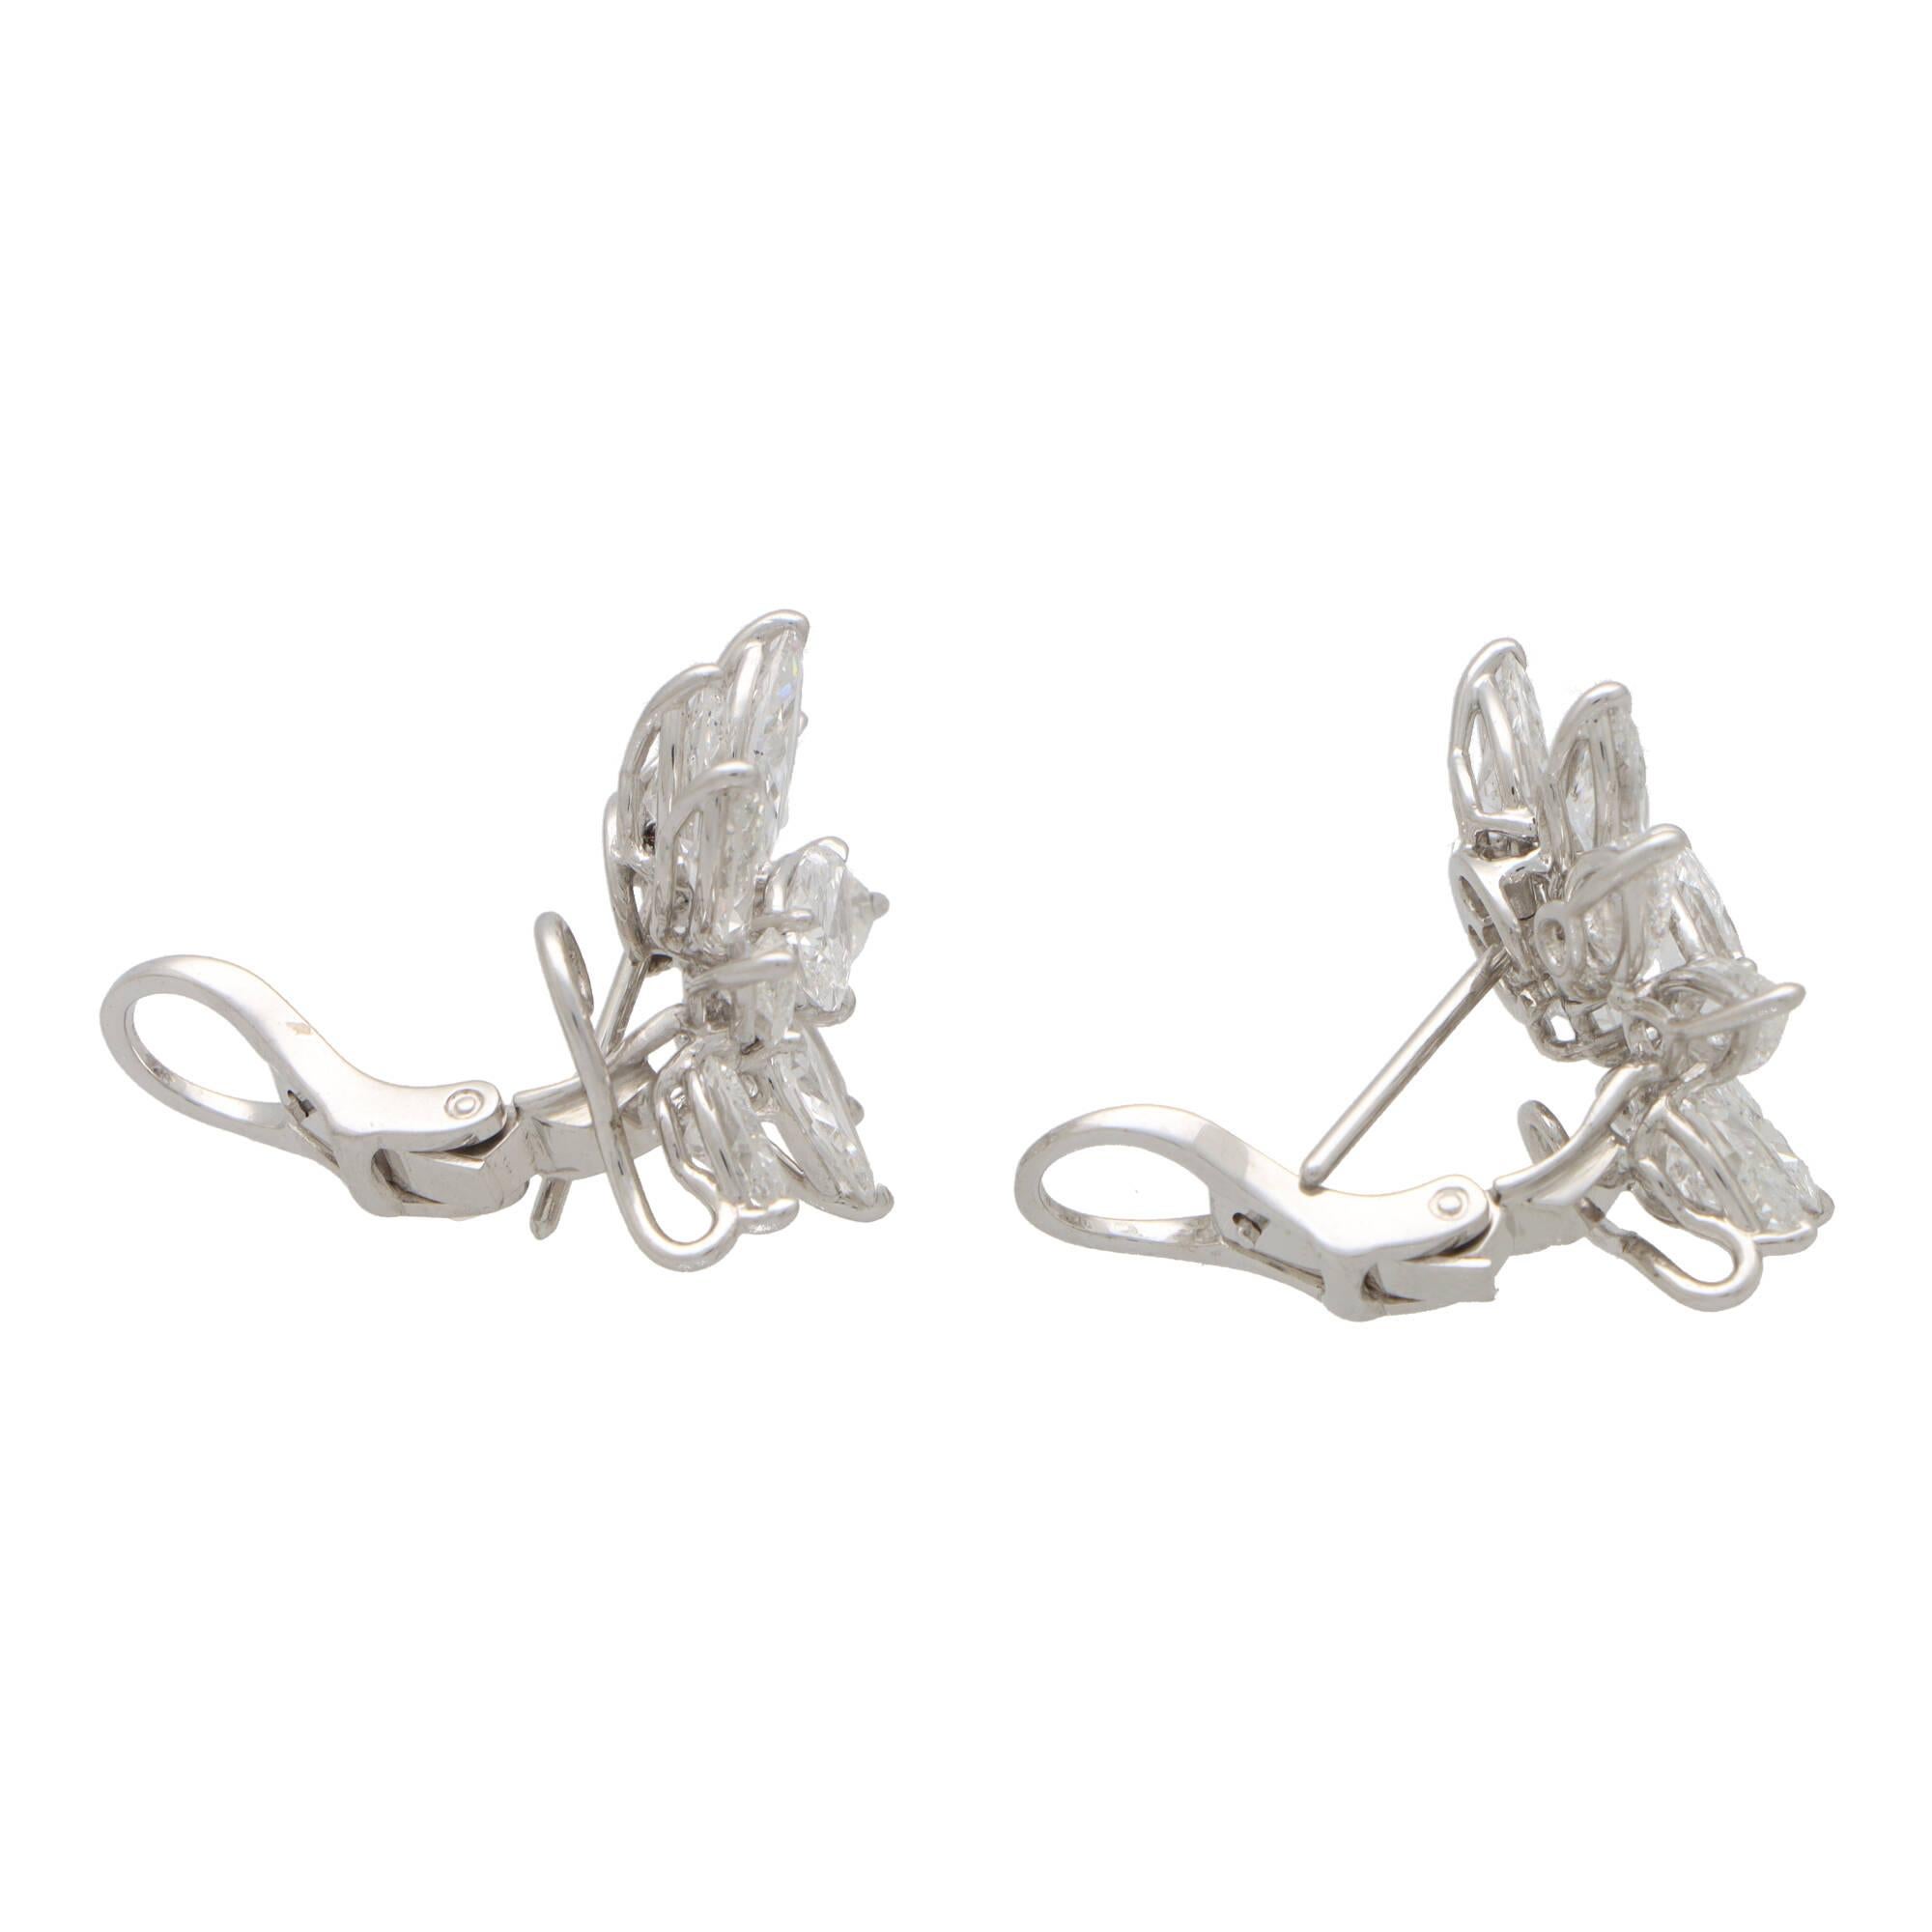 Pear Cut Pear and Marquise Cut Diamond Floral Cluster Earrings Set in Platinum